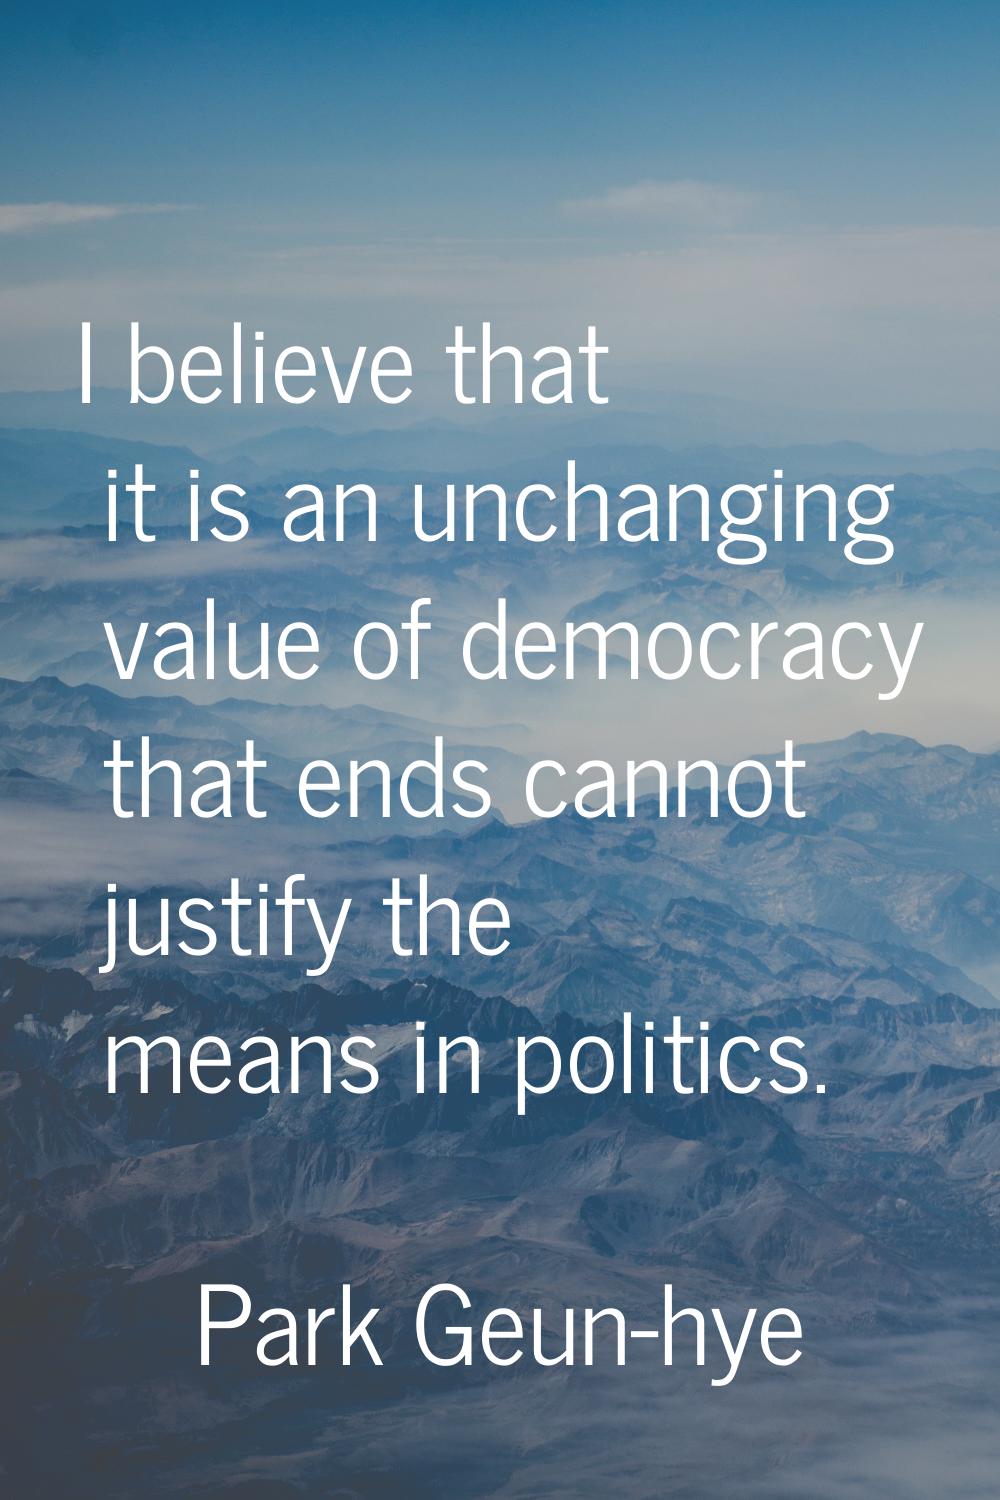 I believe that it is an unchanging value of democracy that ends cannot justify the means in politic